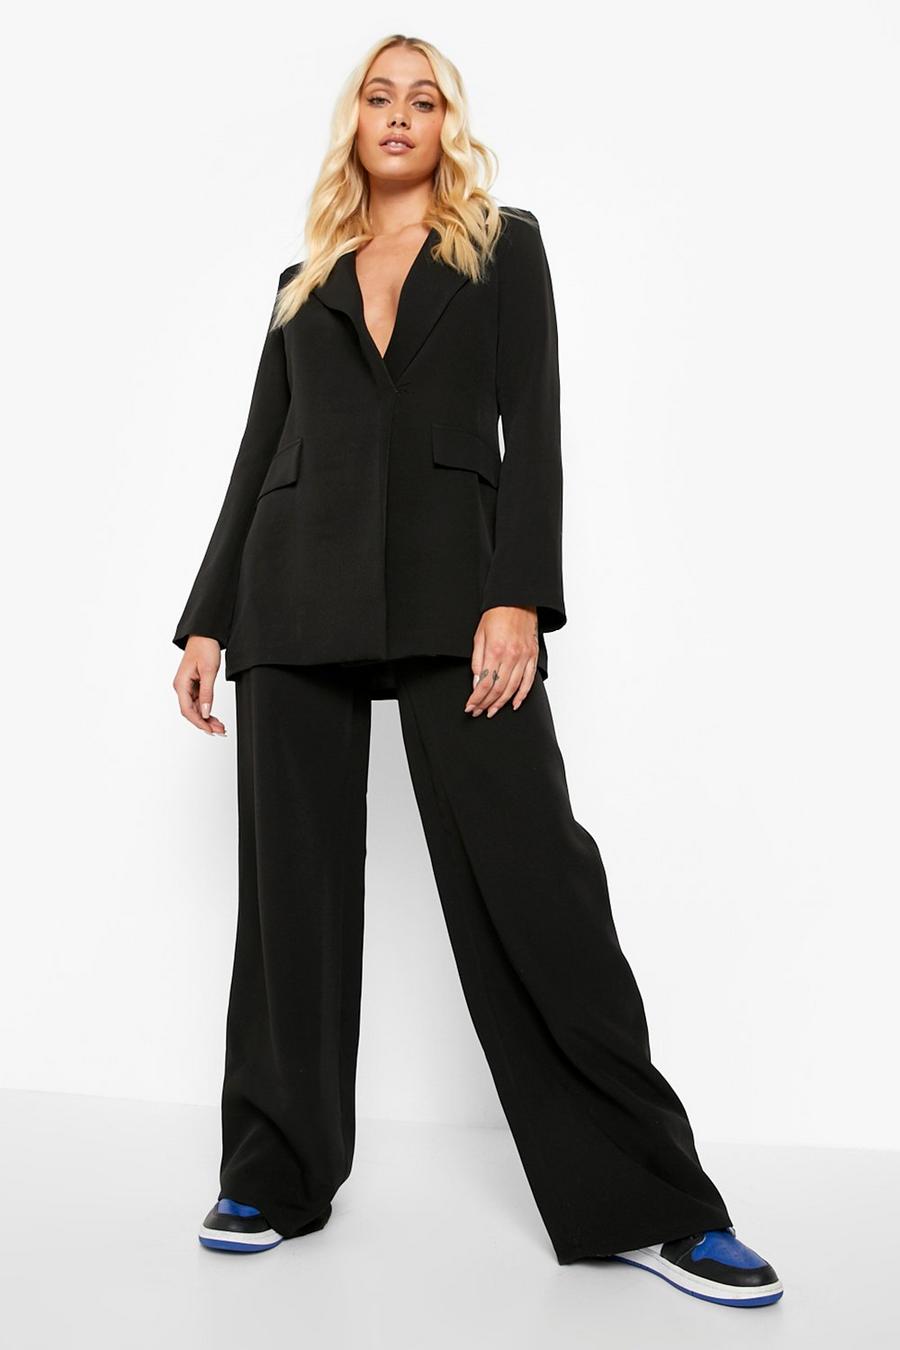 Black Wide Leg Tailored Trousers